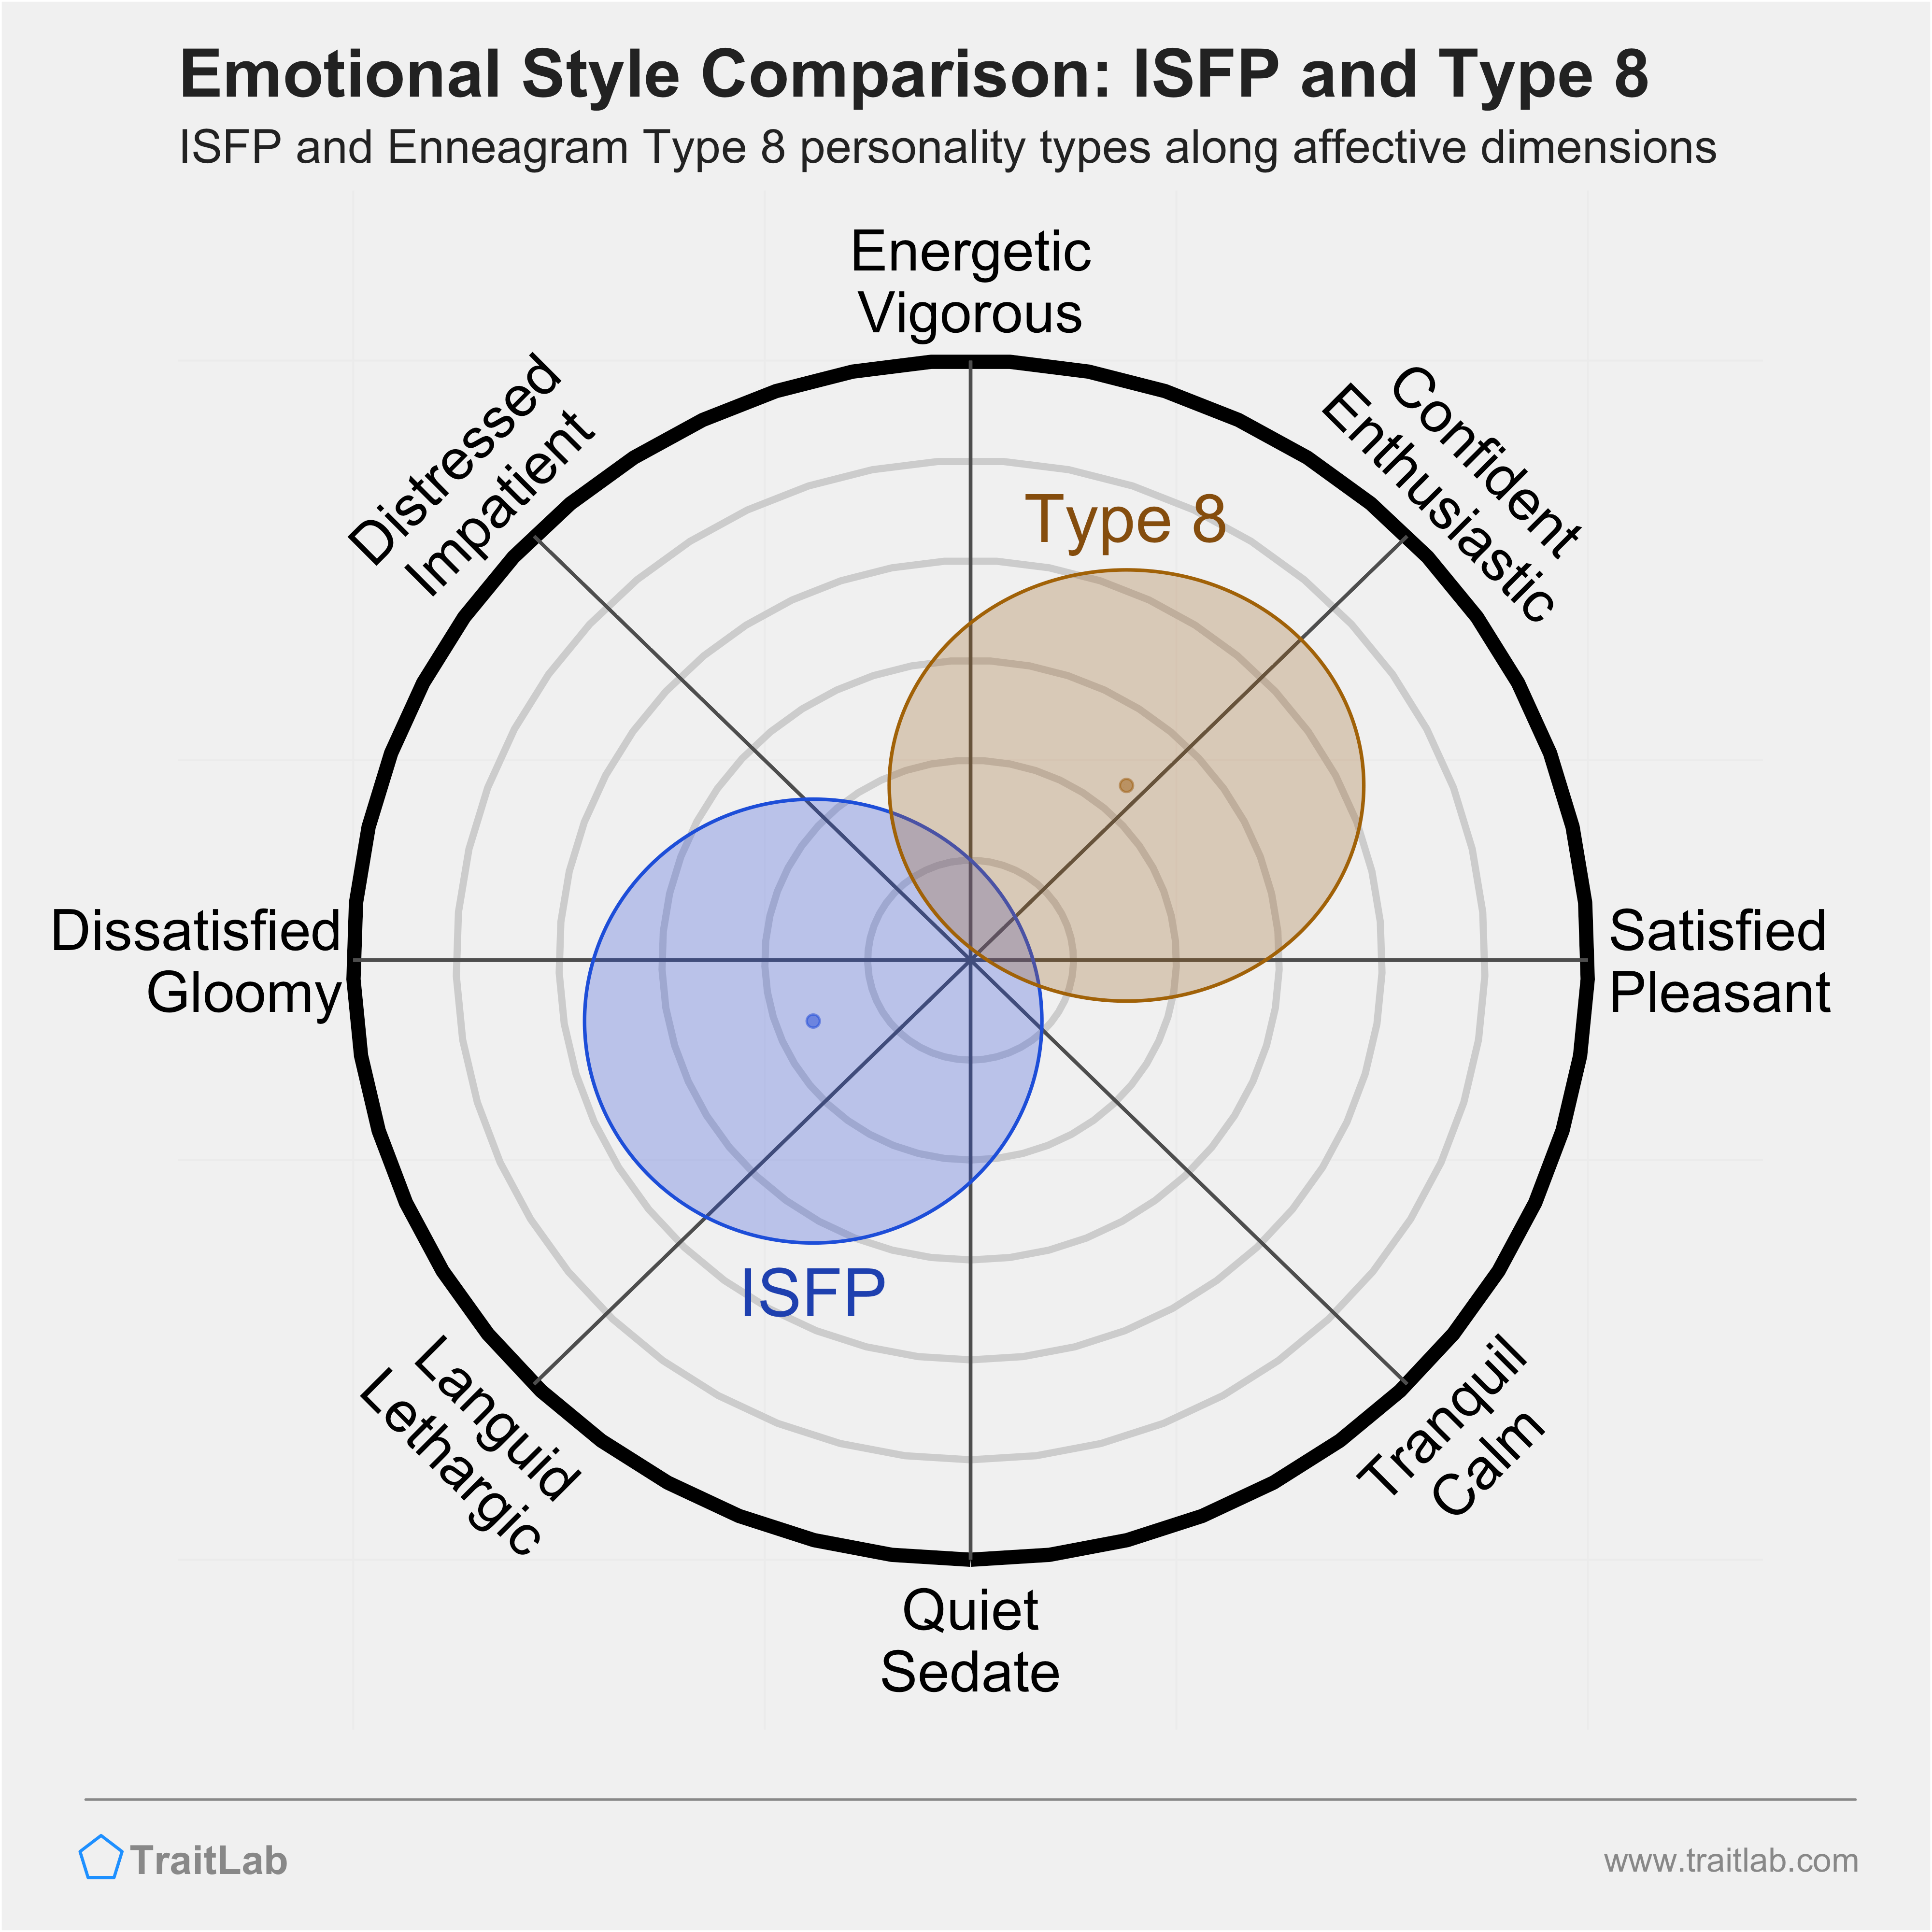 ISFP and Type 8 comparison across emotional (affective) dimensions